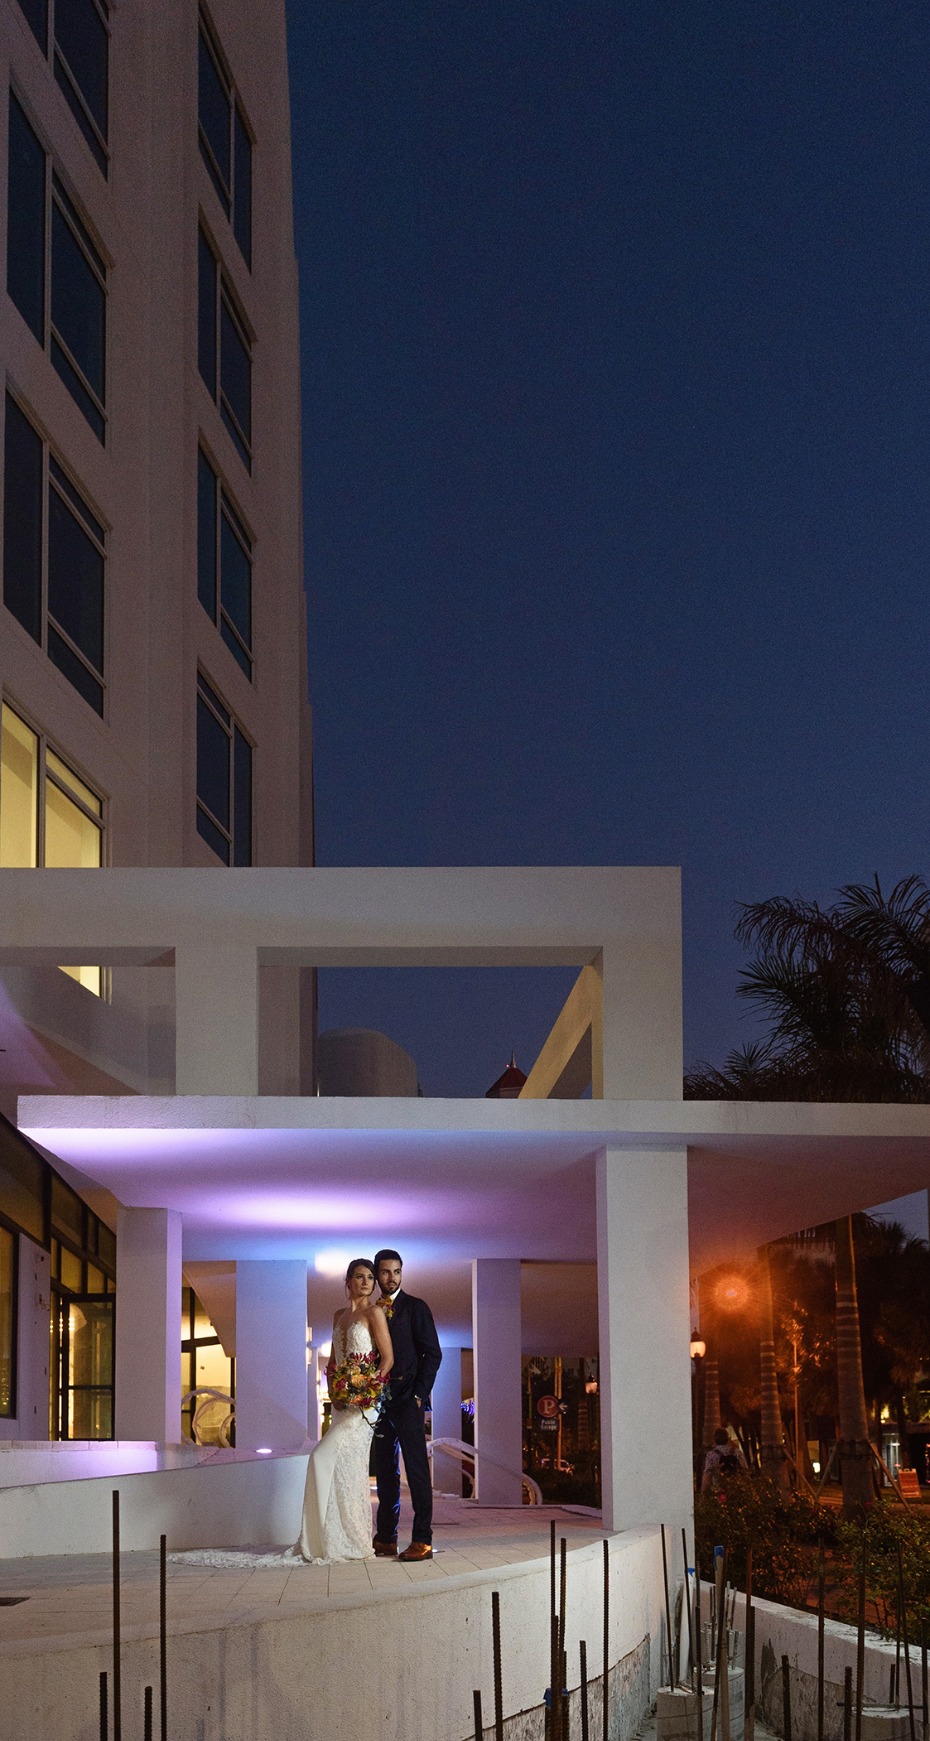 The Art Ovation Hotel in Florida is a hot new wedding venue